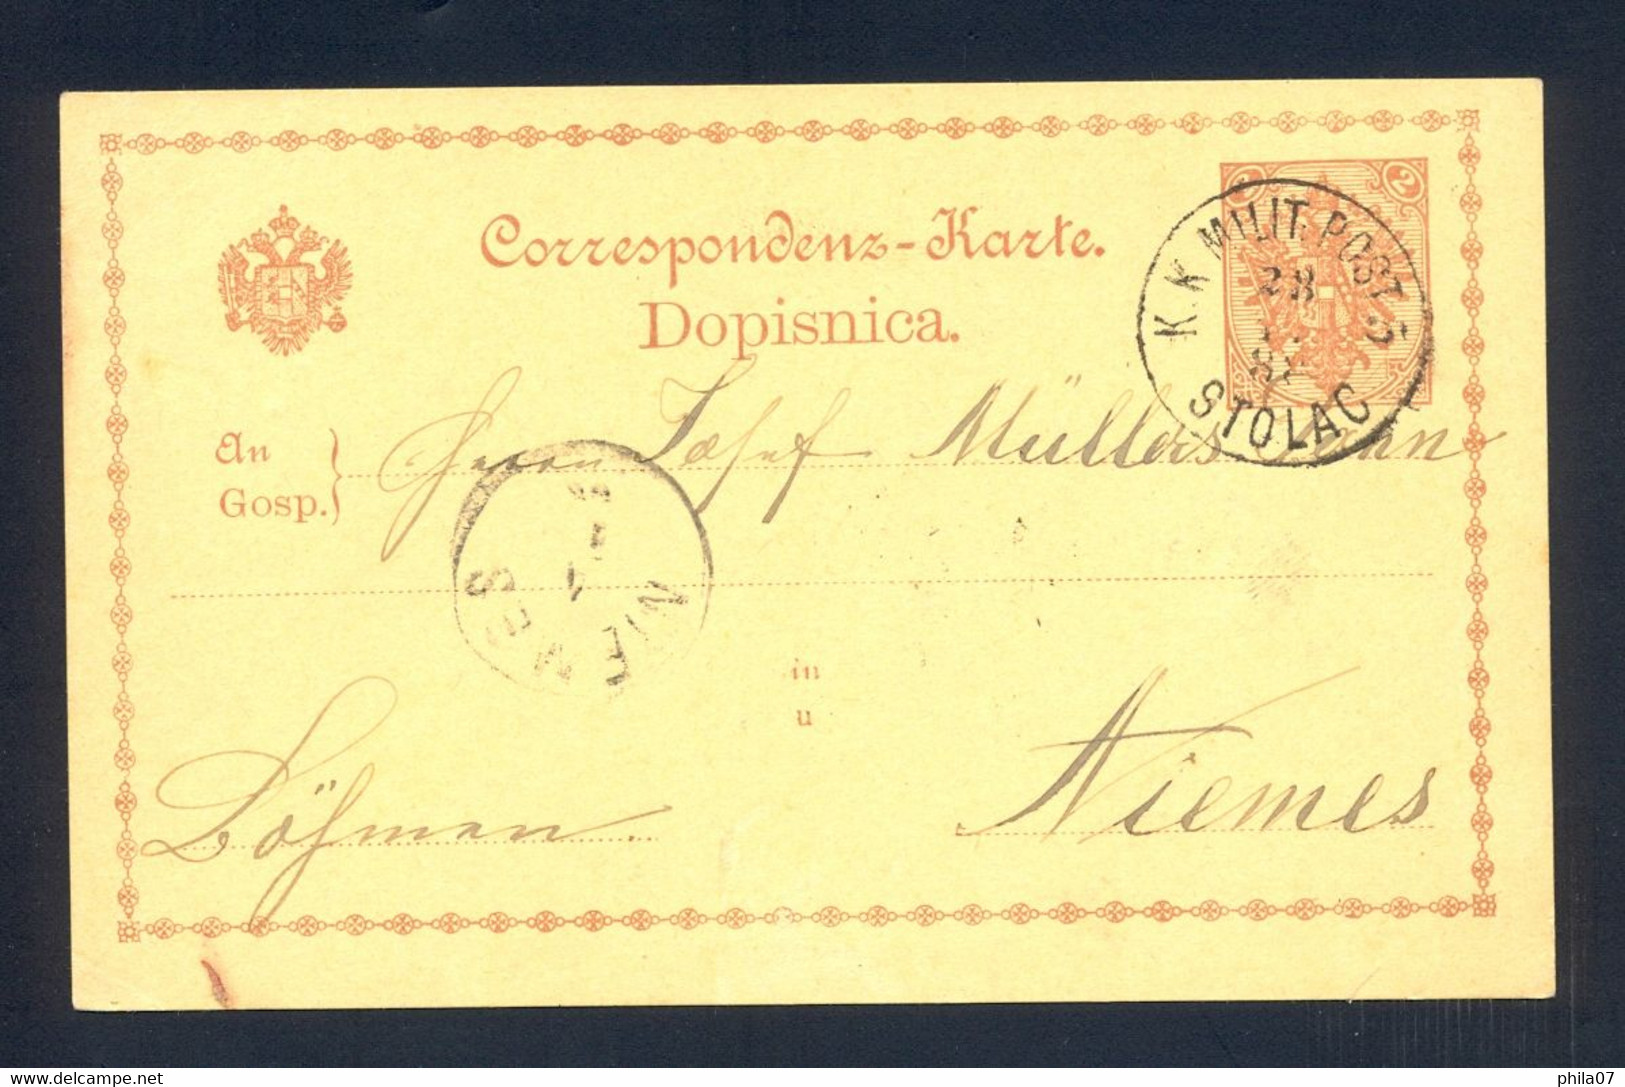 BOSNIA AND HERZEGOVINA - Stationery Cancelled With First Type K.K. Milit.Post STOLAC. Statinery Sent From Stolac To Niem - Bosnien-Herzegowina